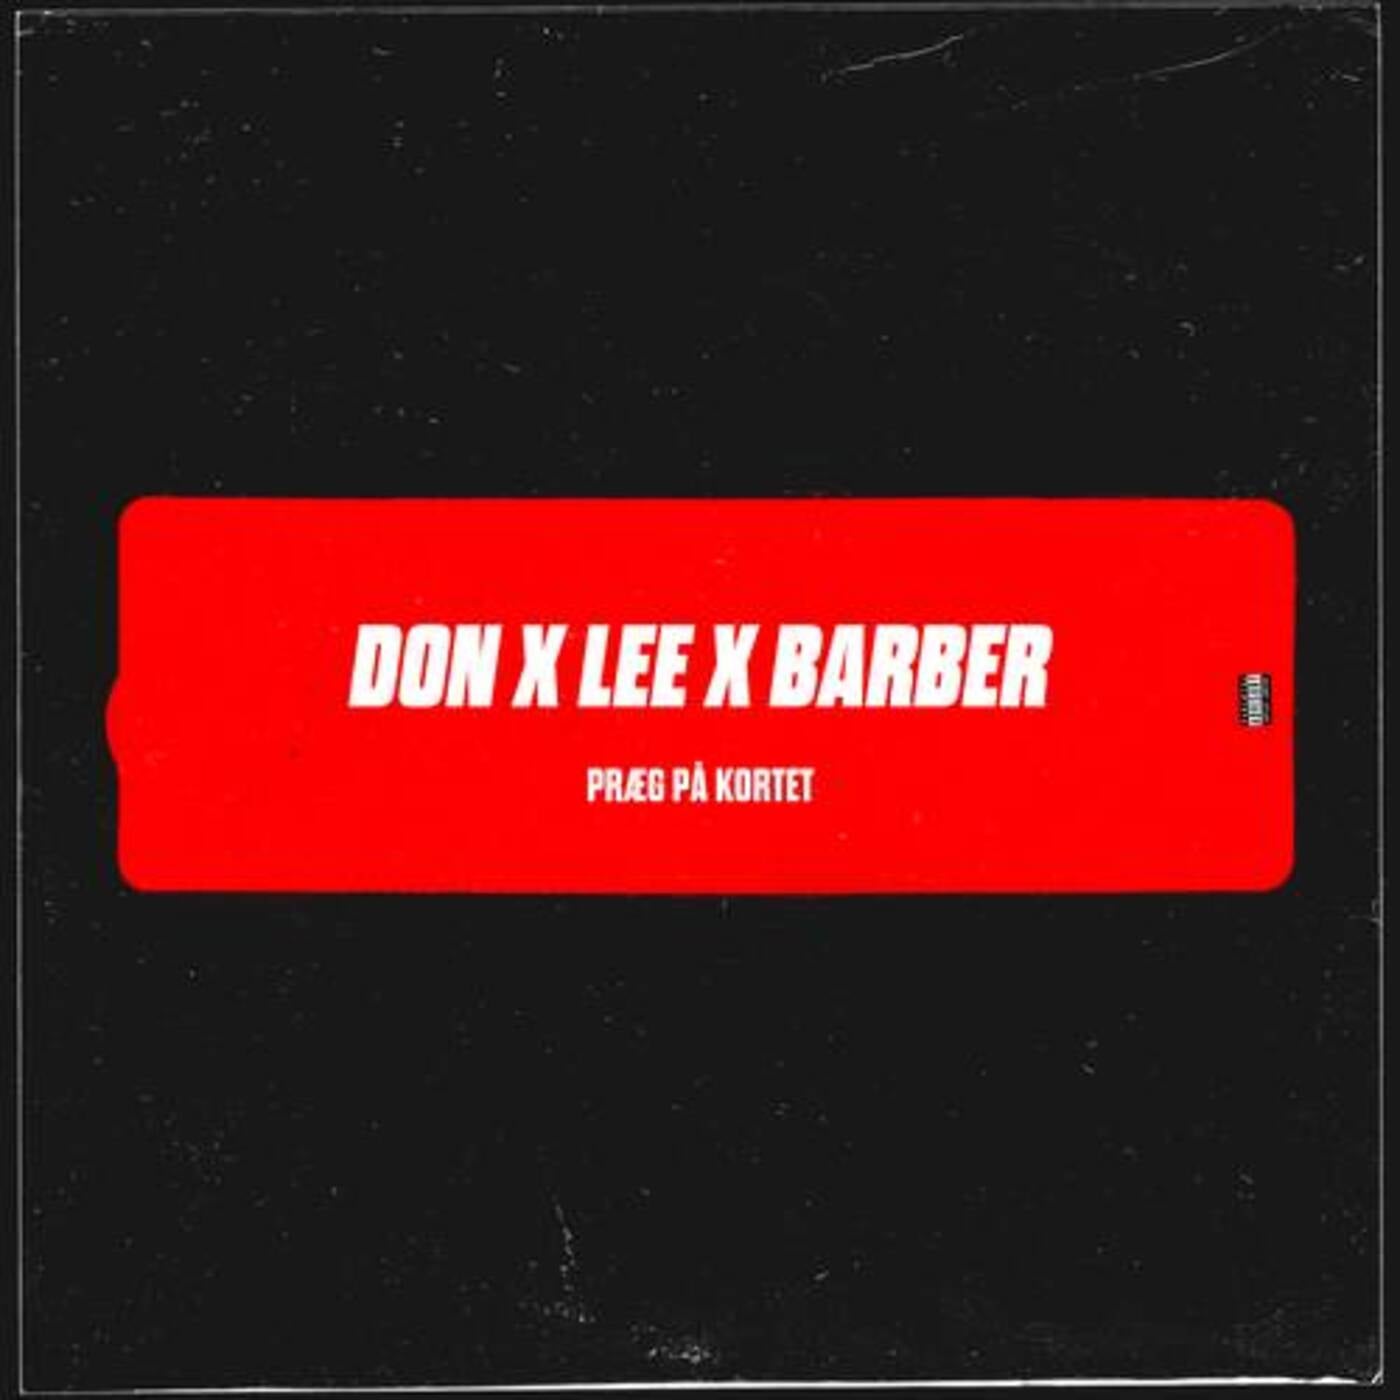 Learner medarbejder dinosaurus Gucci Bag Sikini by DON x LEE x BARBER on Beatsource